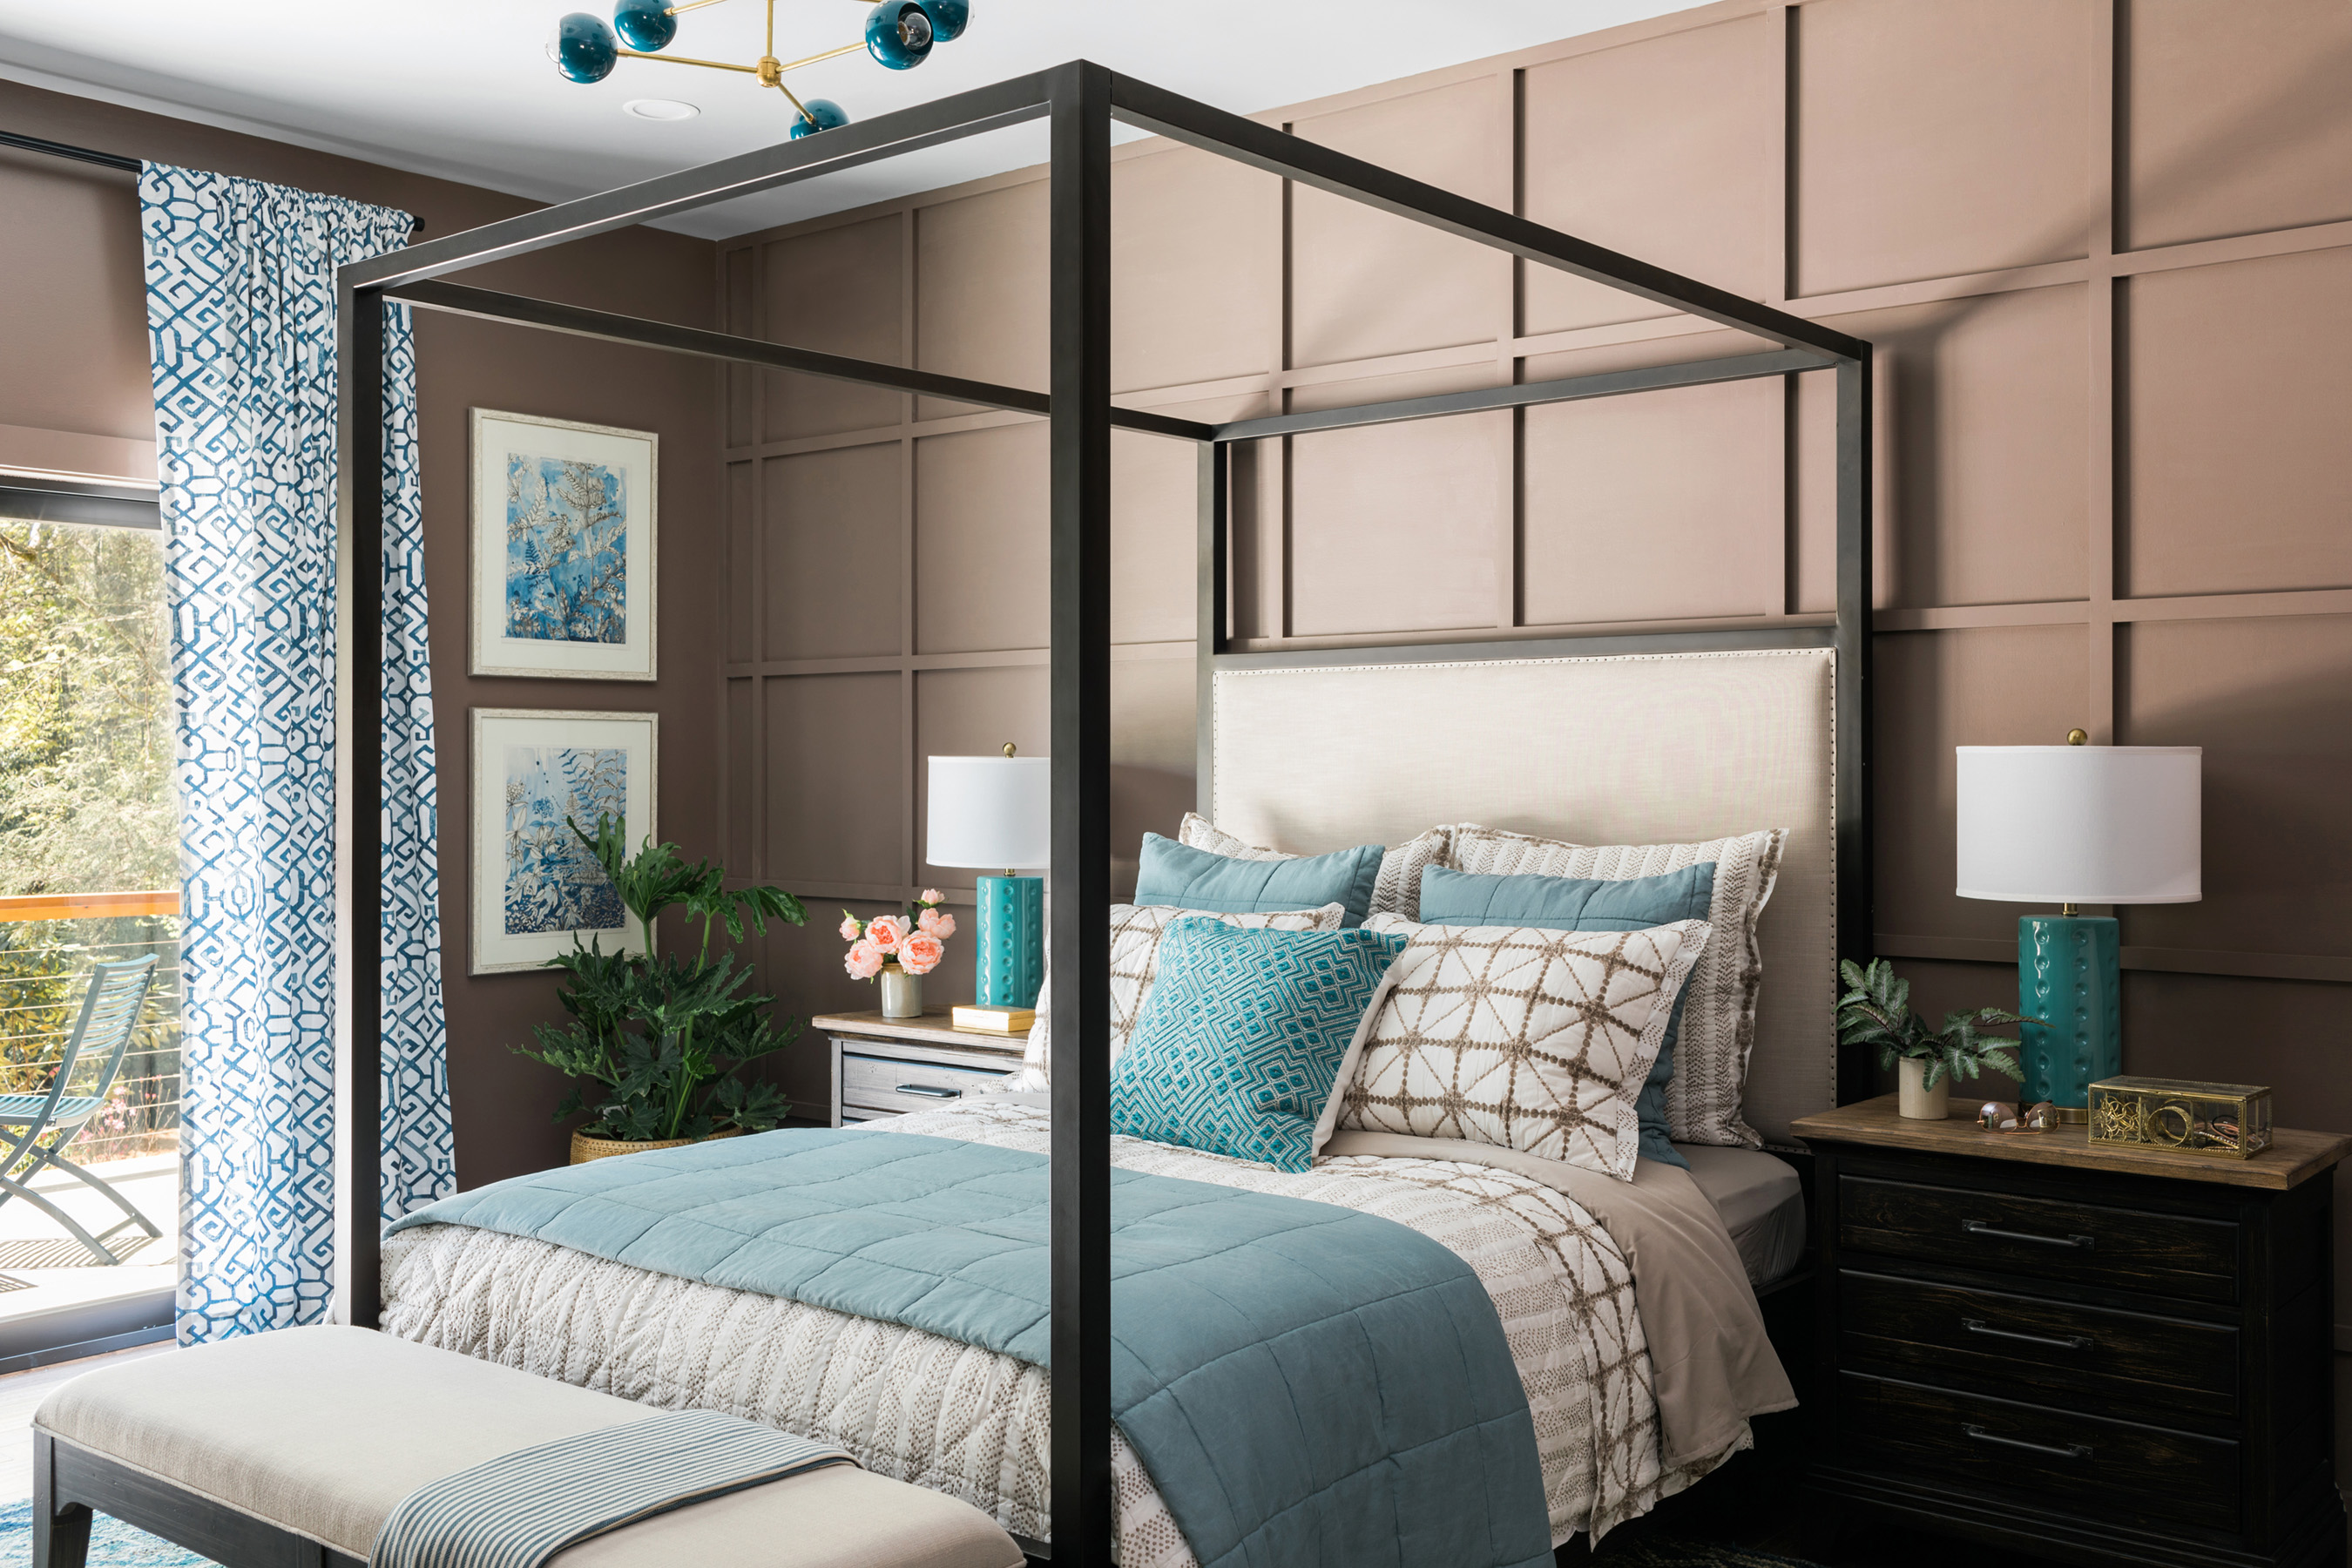 With a dramatic grid wall, a modern canopy bed, upcycled furniture and a huge walk-in closet, the stunning master bedroom in DIY Network Ultimate Retreat 2018 is truly one of a kind. Ready to feel the breeze? Slide the trick glass doors all the way into the wall and open the room up to the tranquil surroundings. With charm to spare, a stylish mix of modern and vintage touches and a decidedly serene atmosphere, this master bedroom is perfect for an escape in the mountains.